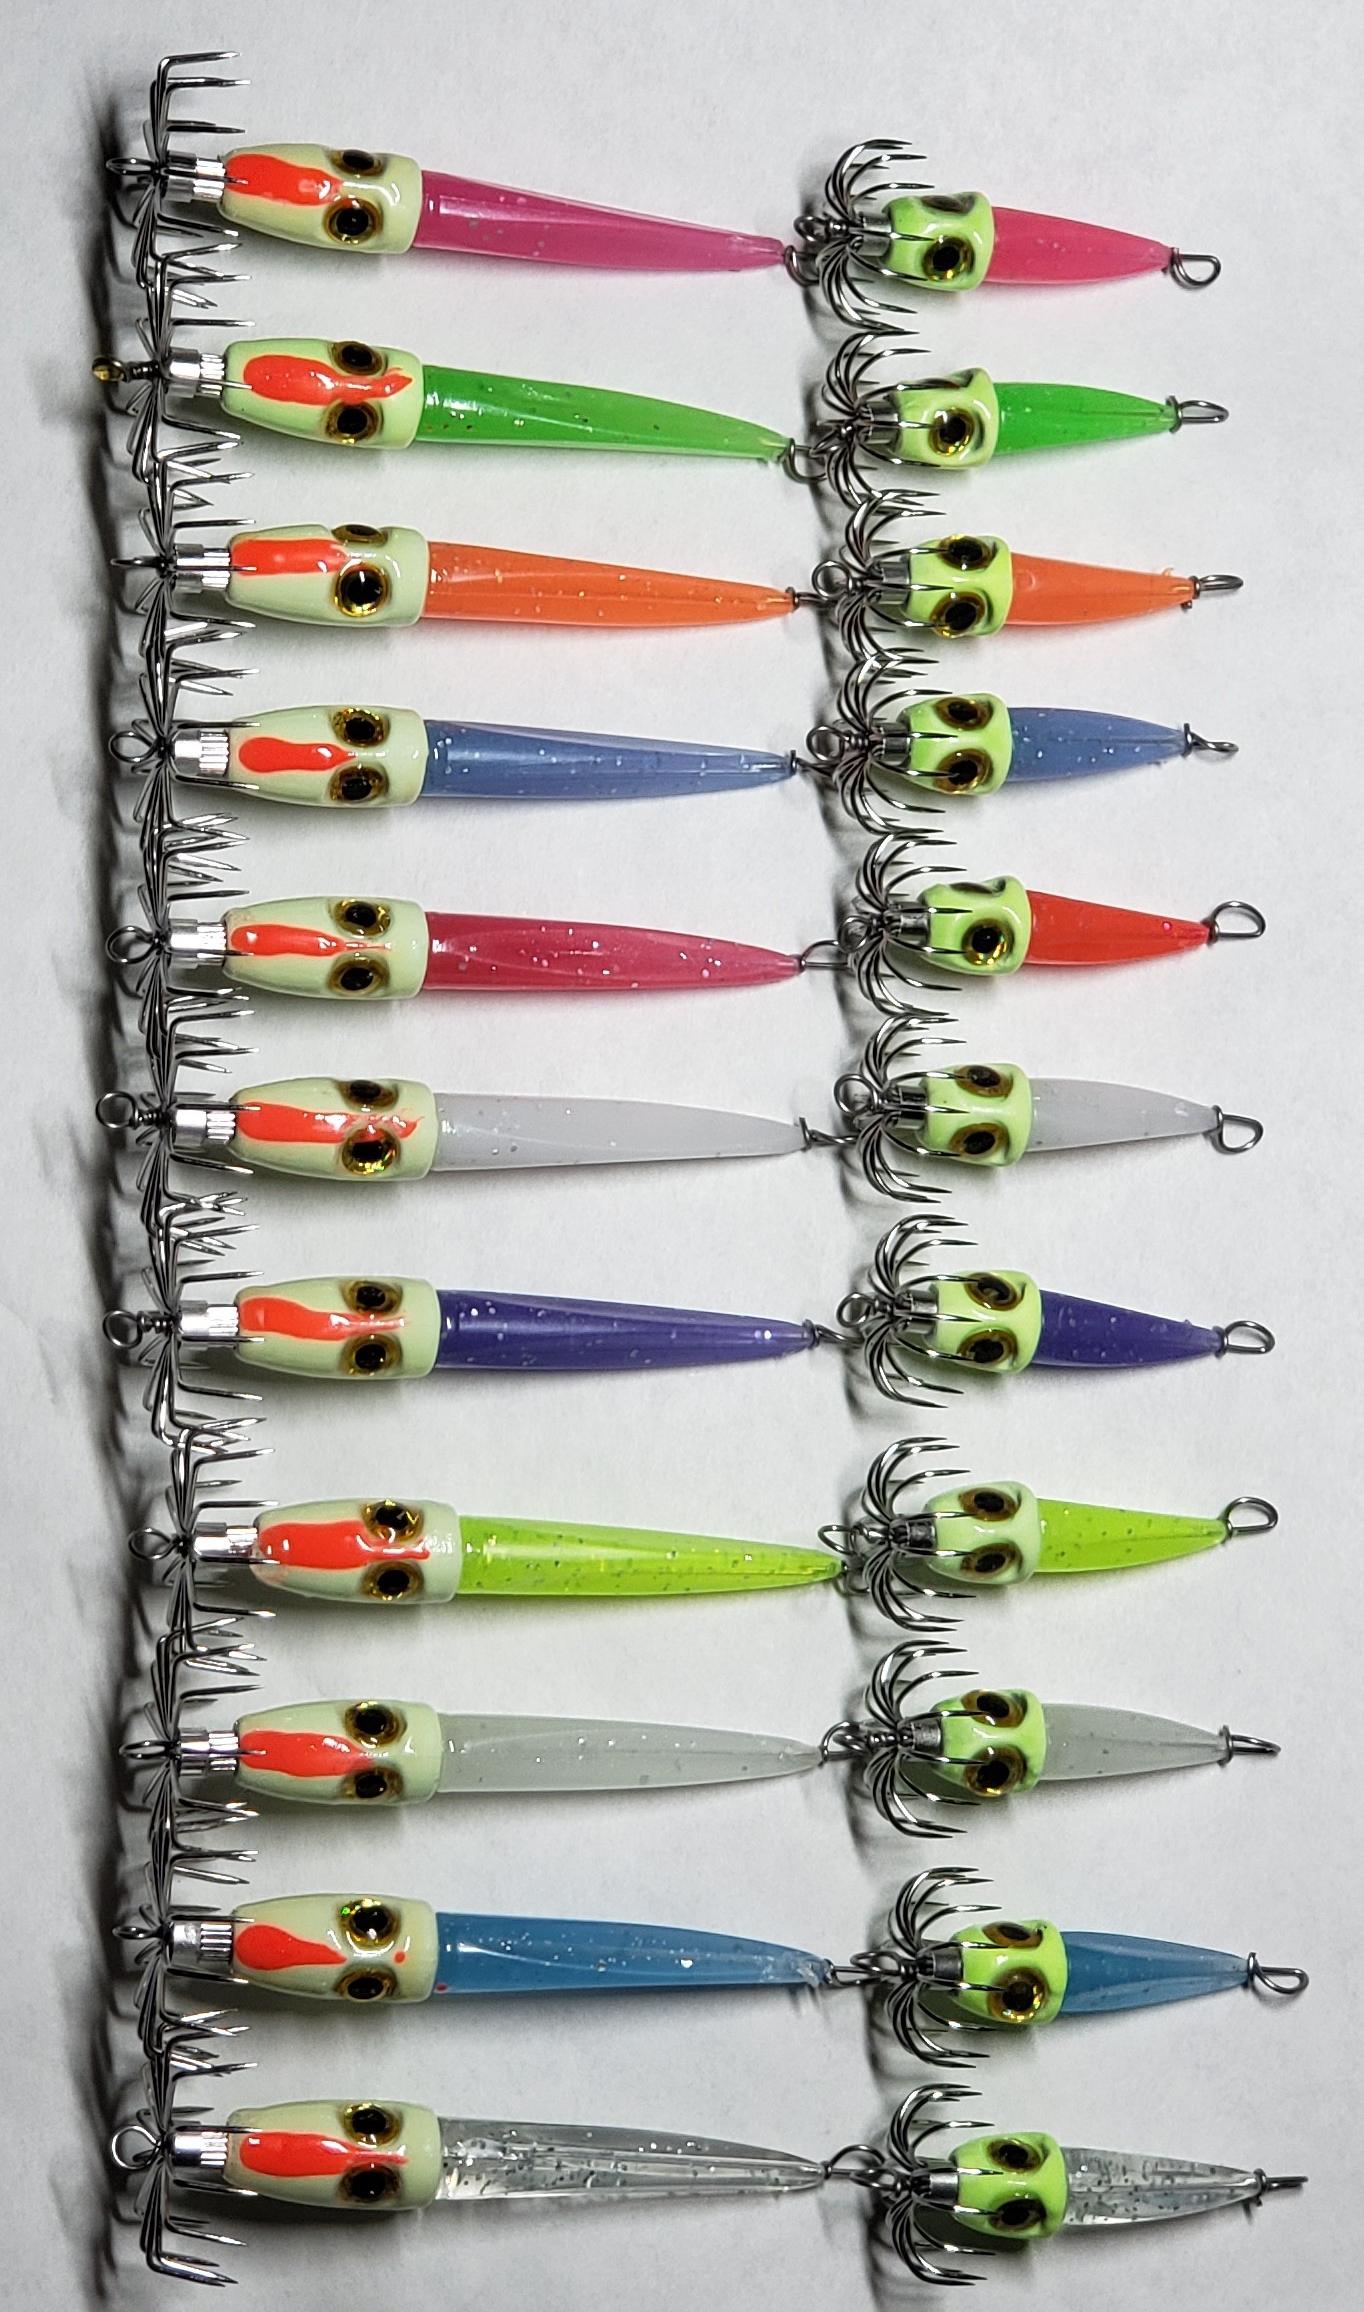 Weighted Bullet Squid Jigs